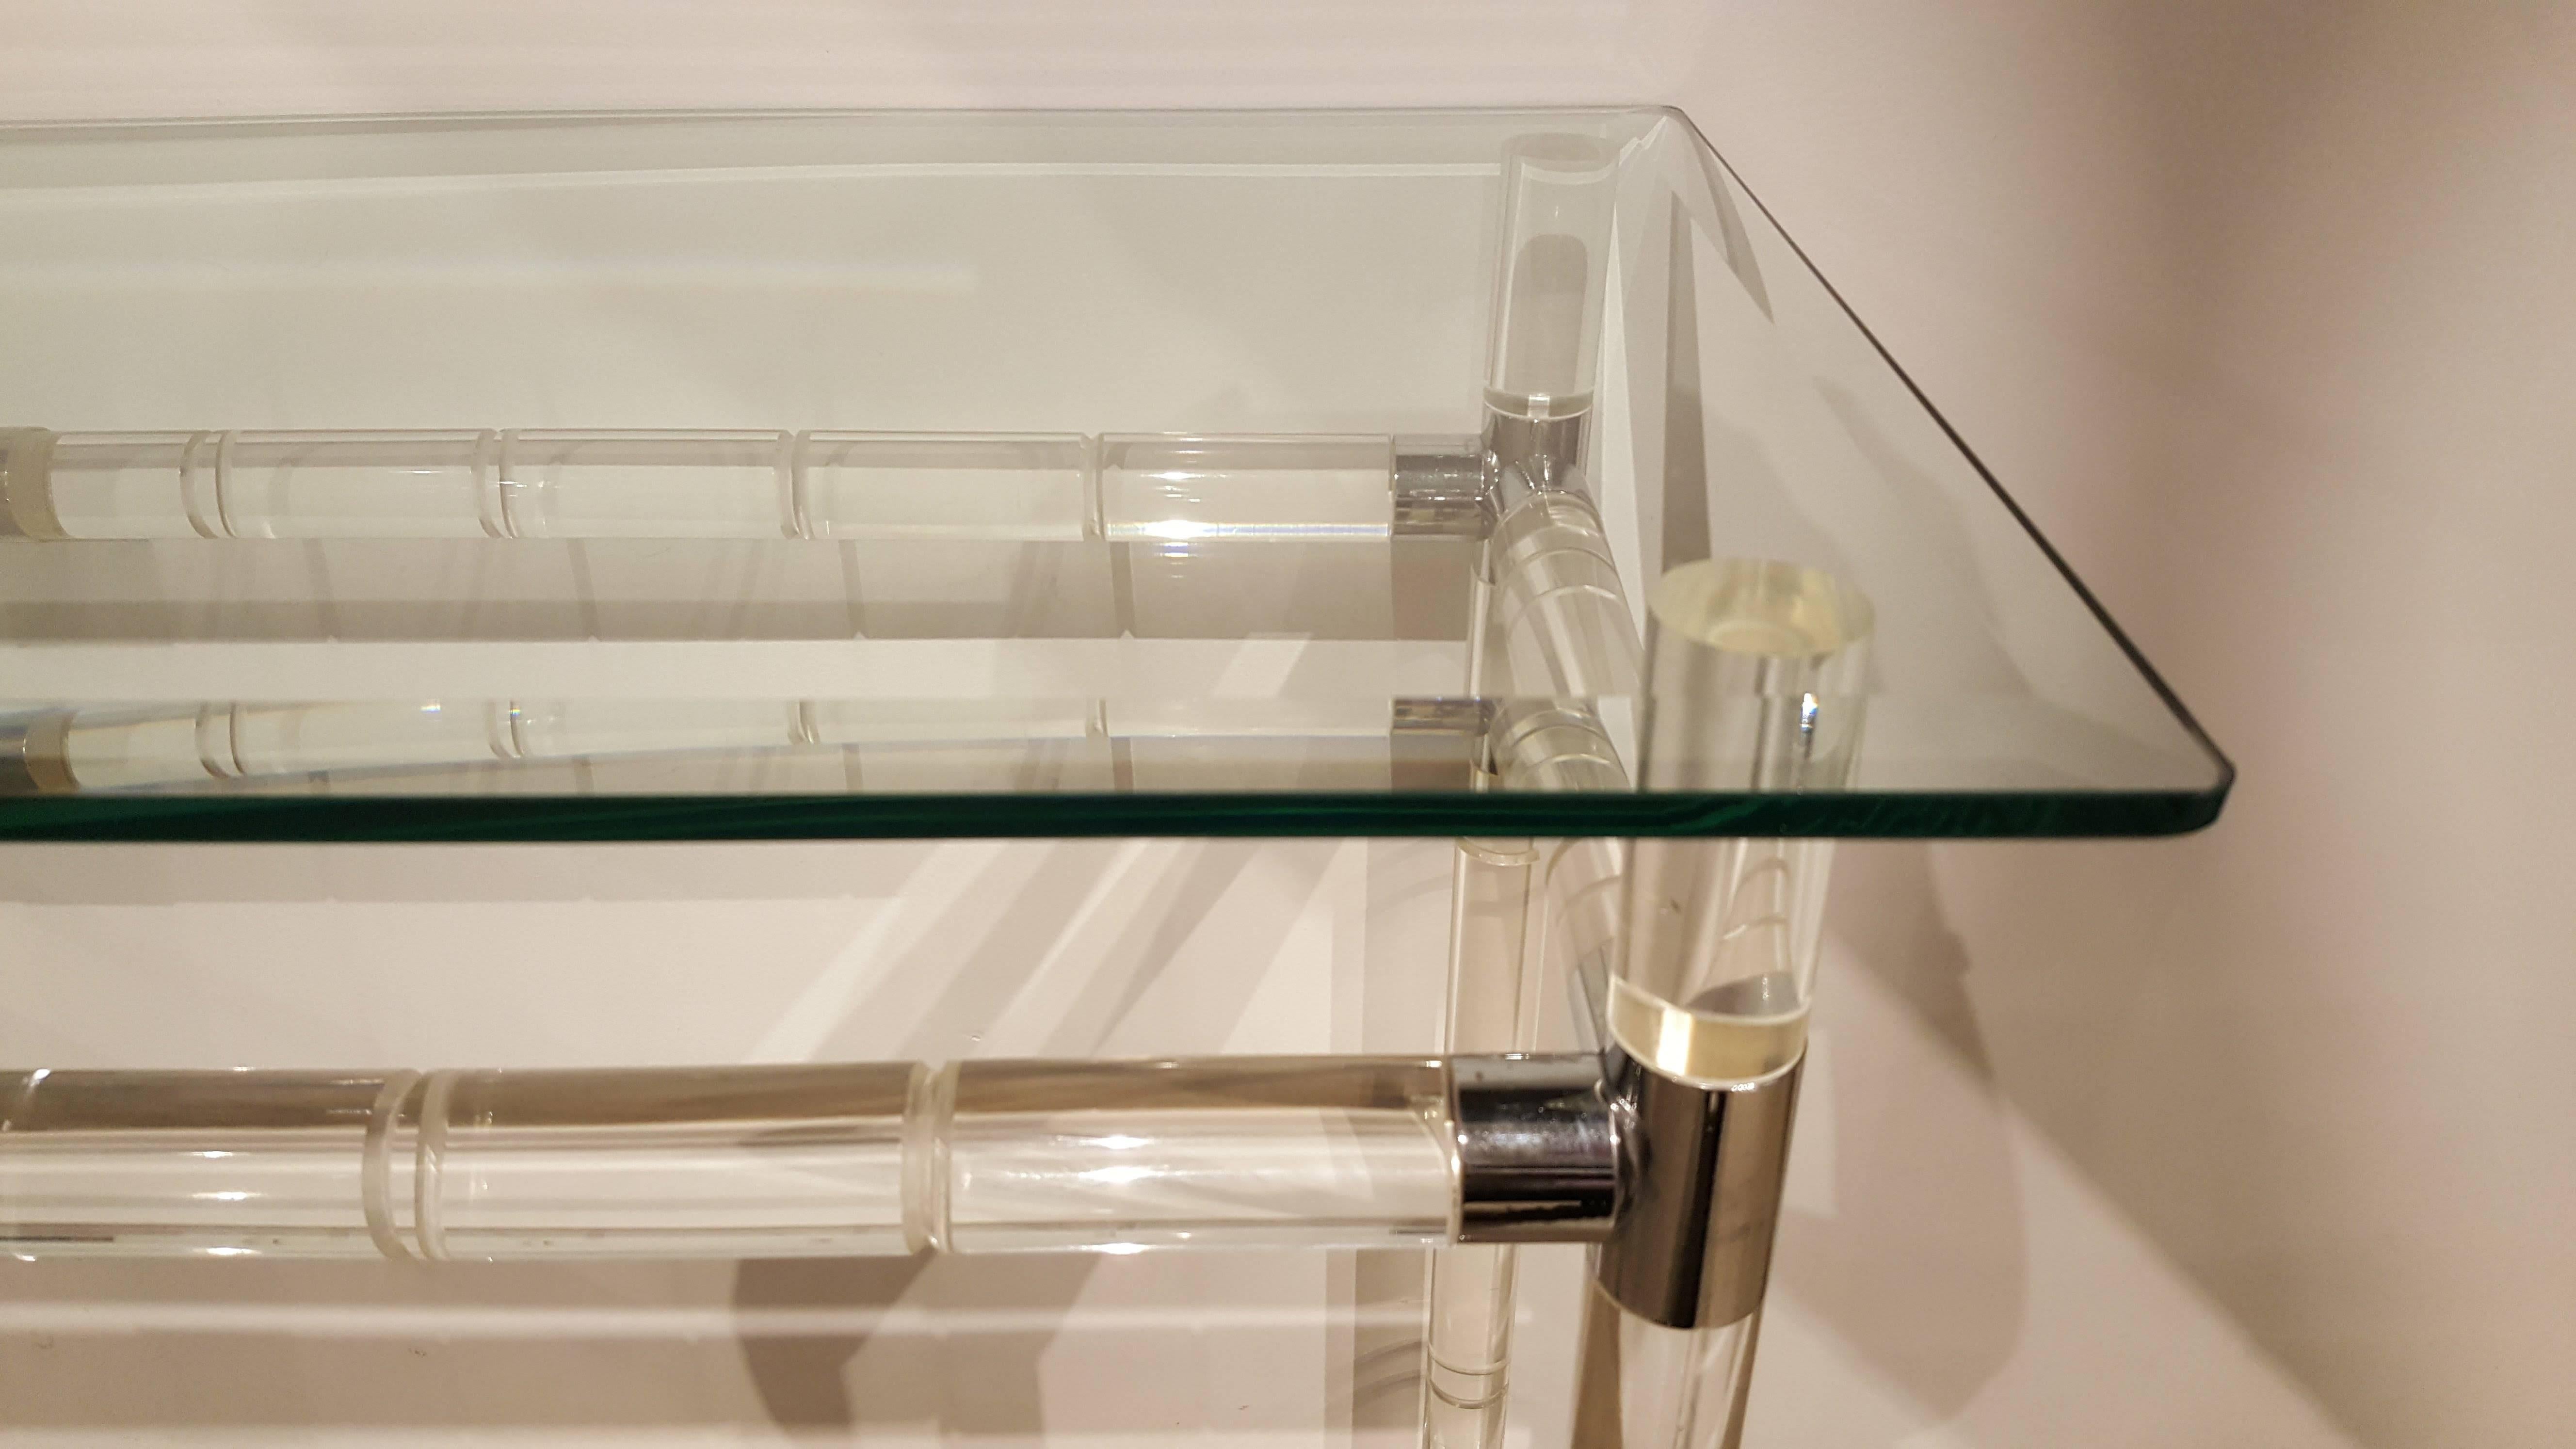 Polished Iconic Charles Hollis Jones Bamboo Console Table in Lucite, Chrome and Glass